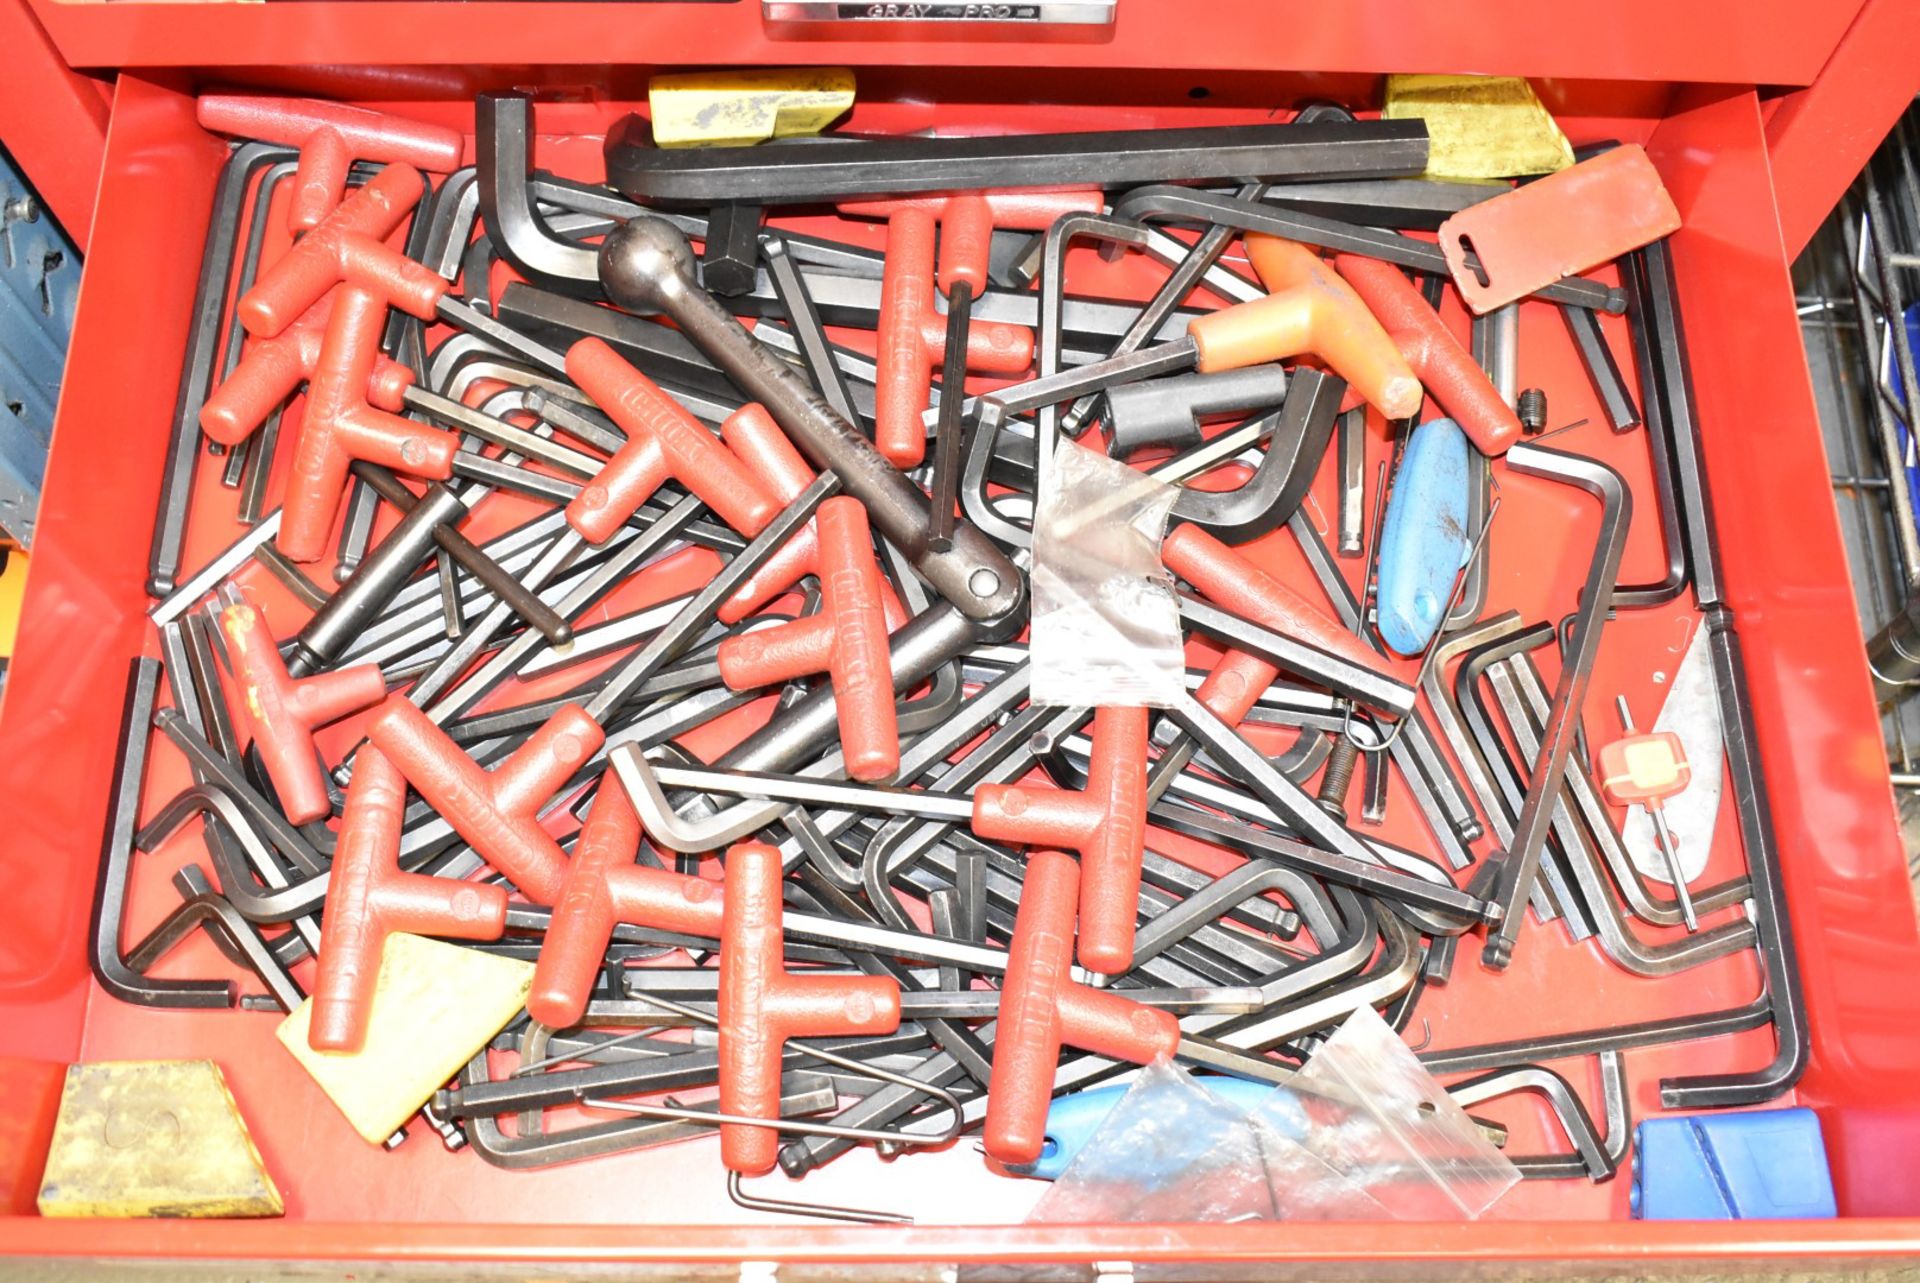 LOT/ GRAY TOOLS 5-DRAWER TOOLBOX WITH CONTENTS CONSISTING OF HAND TOOLS - Image 4 of 6